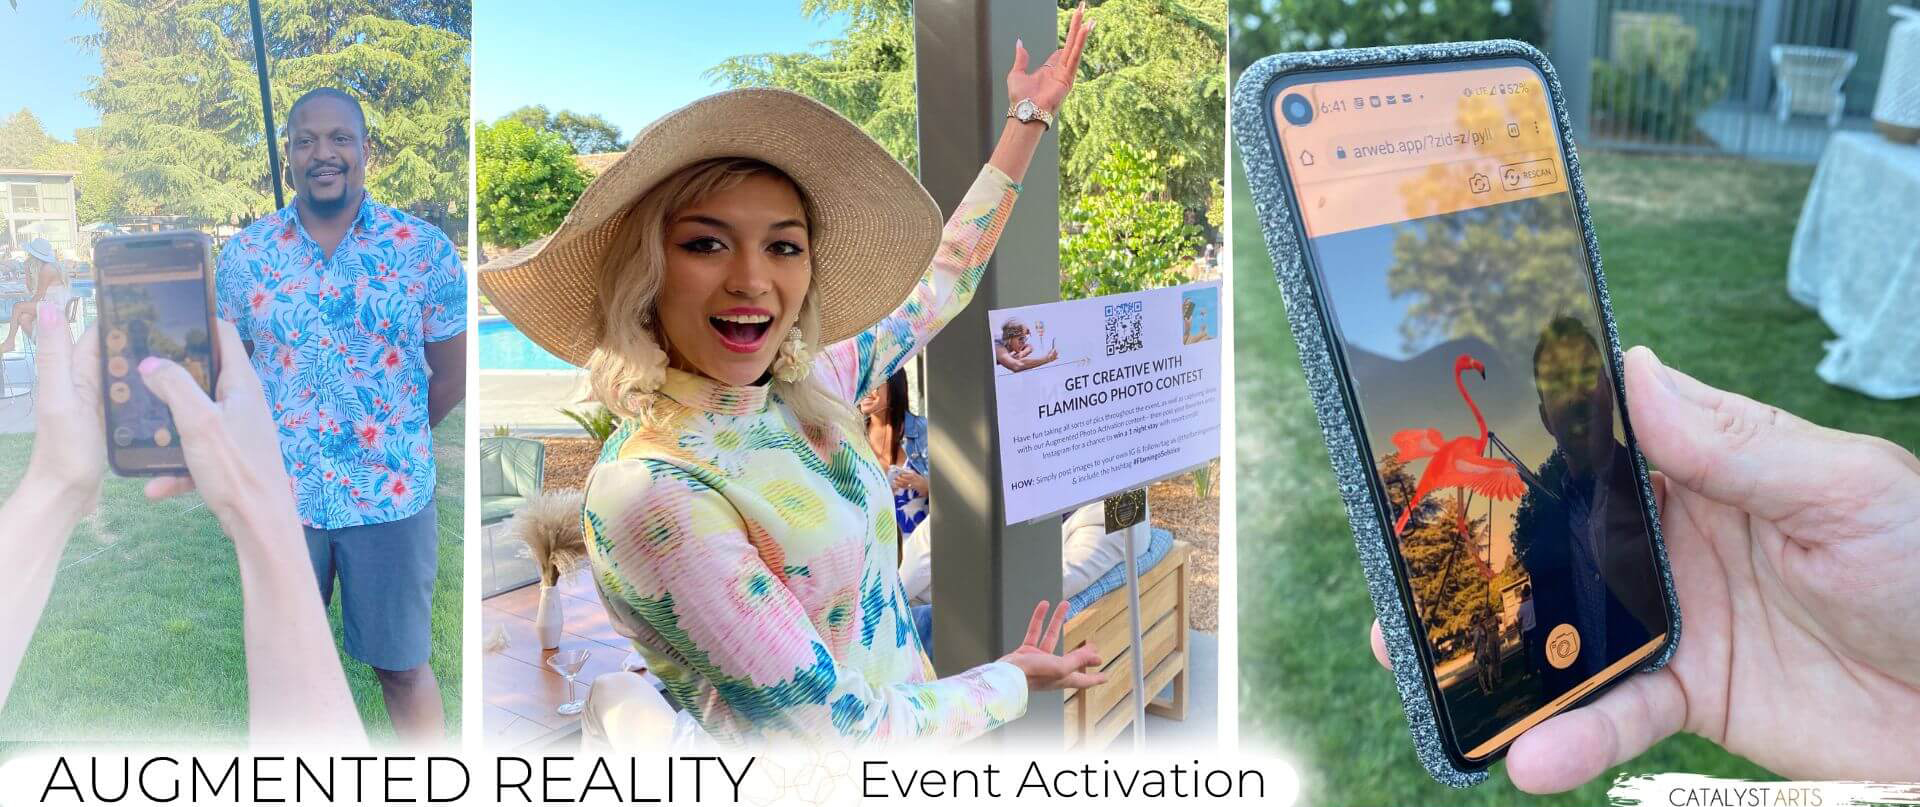 Augmented Reality custom photo event activation by Catalyst Arts 